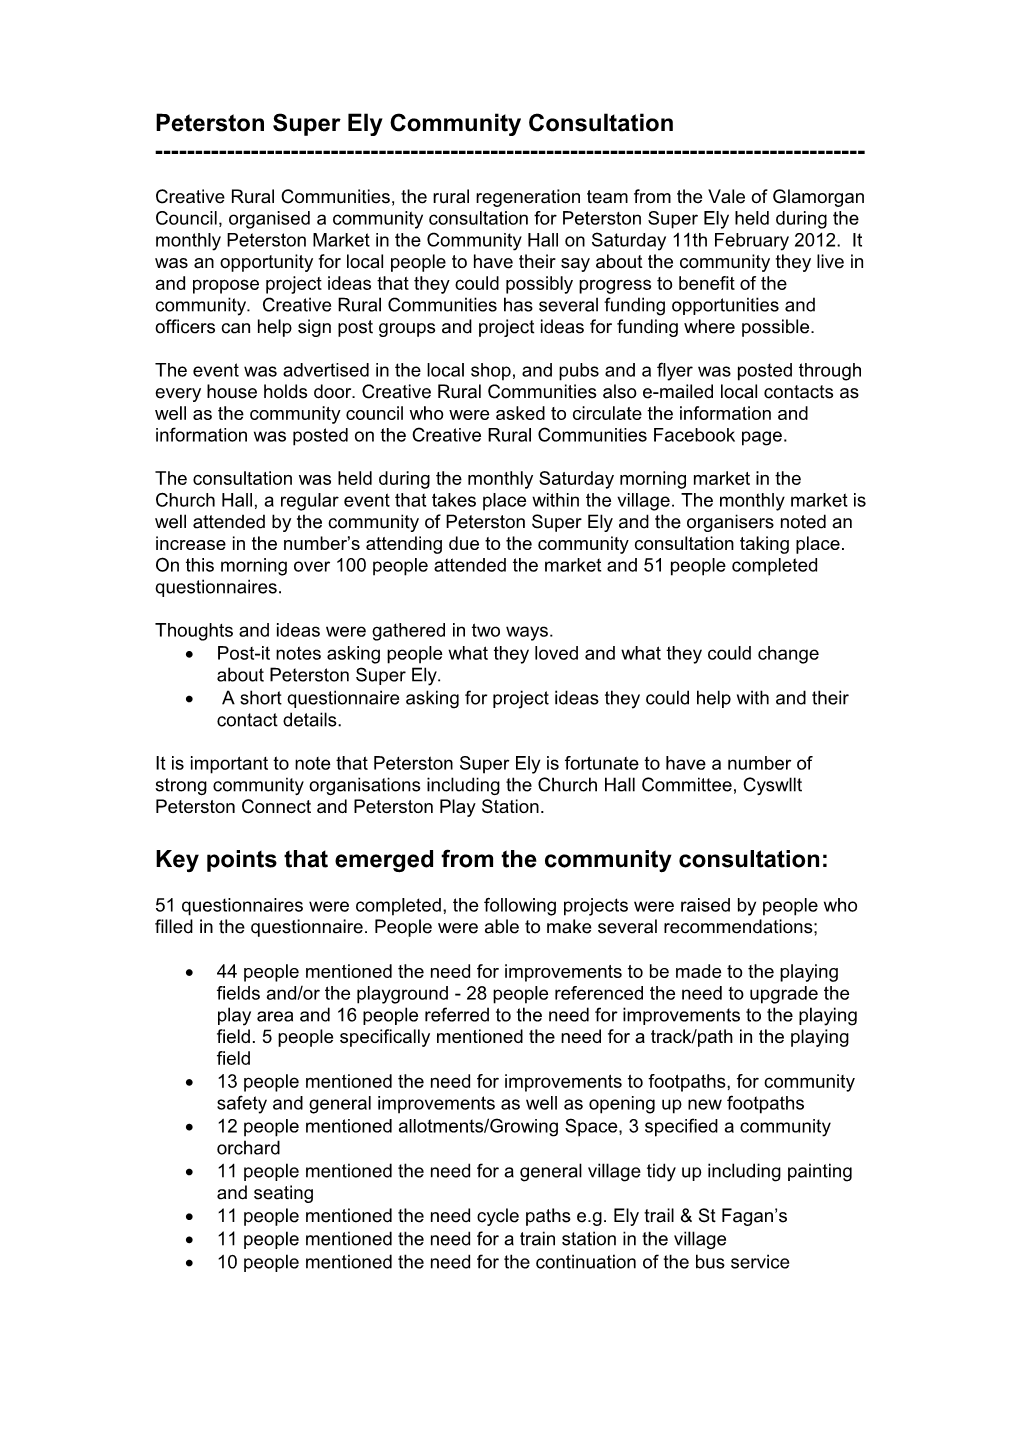 Community Engagement Peterston Super Ely Consultation Summary Report (Final)